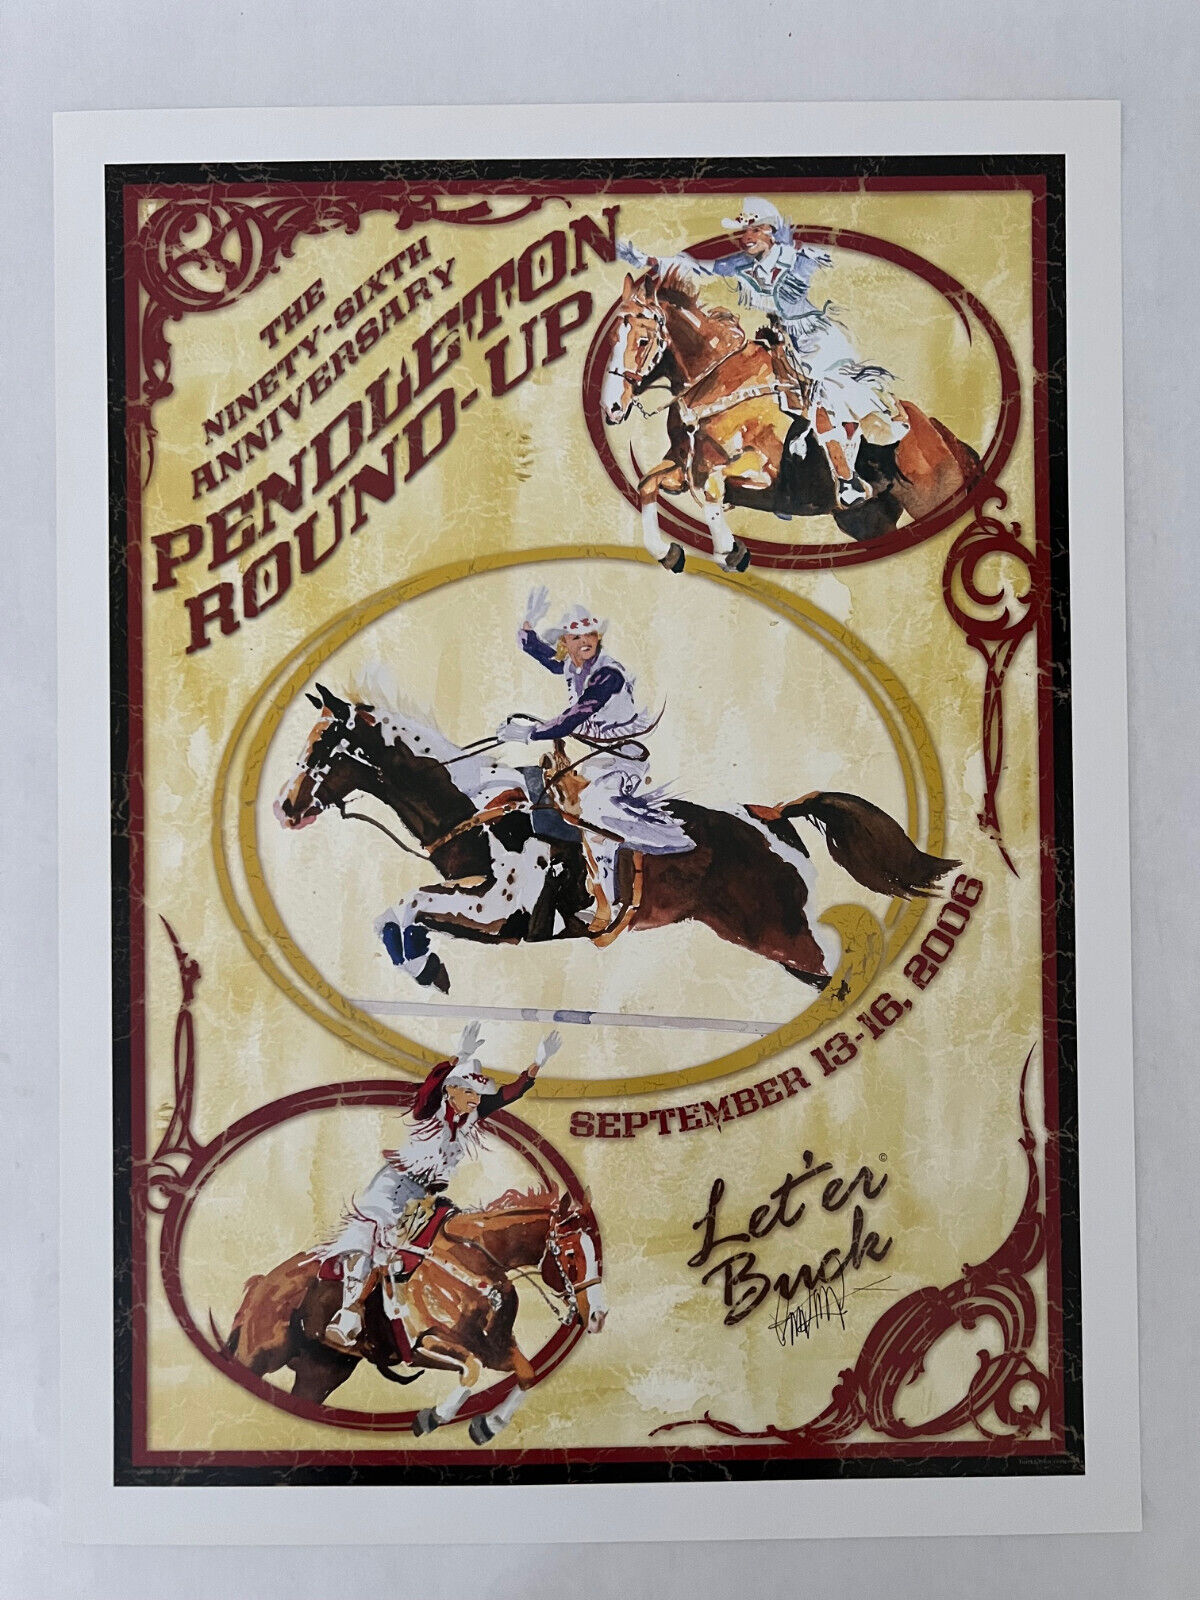 Pendleton Round Up Rodeo Poster Art Signed Oregon Excellent Signed 2006